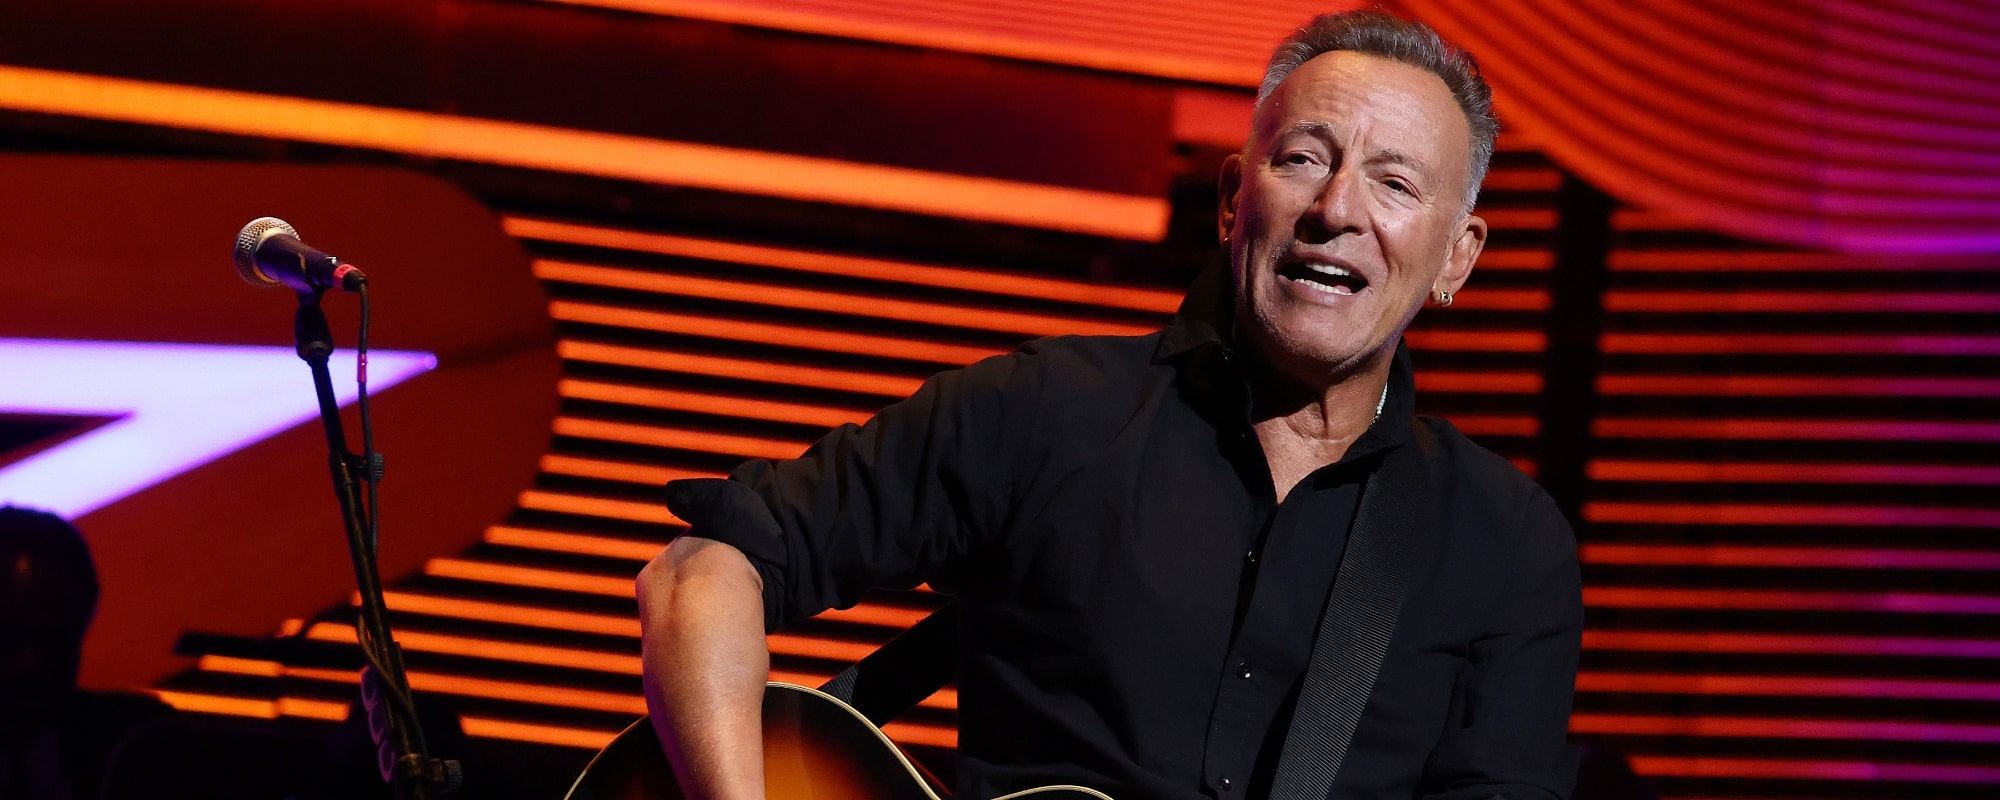 Bruce Springsteen Feared Medical Issues Would Take His Voice—and His Career